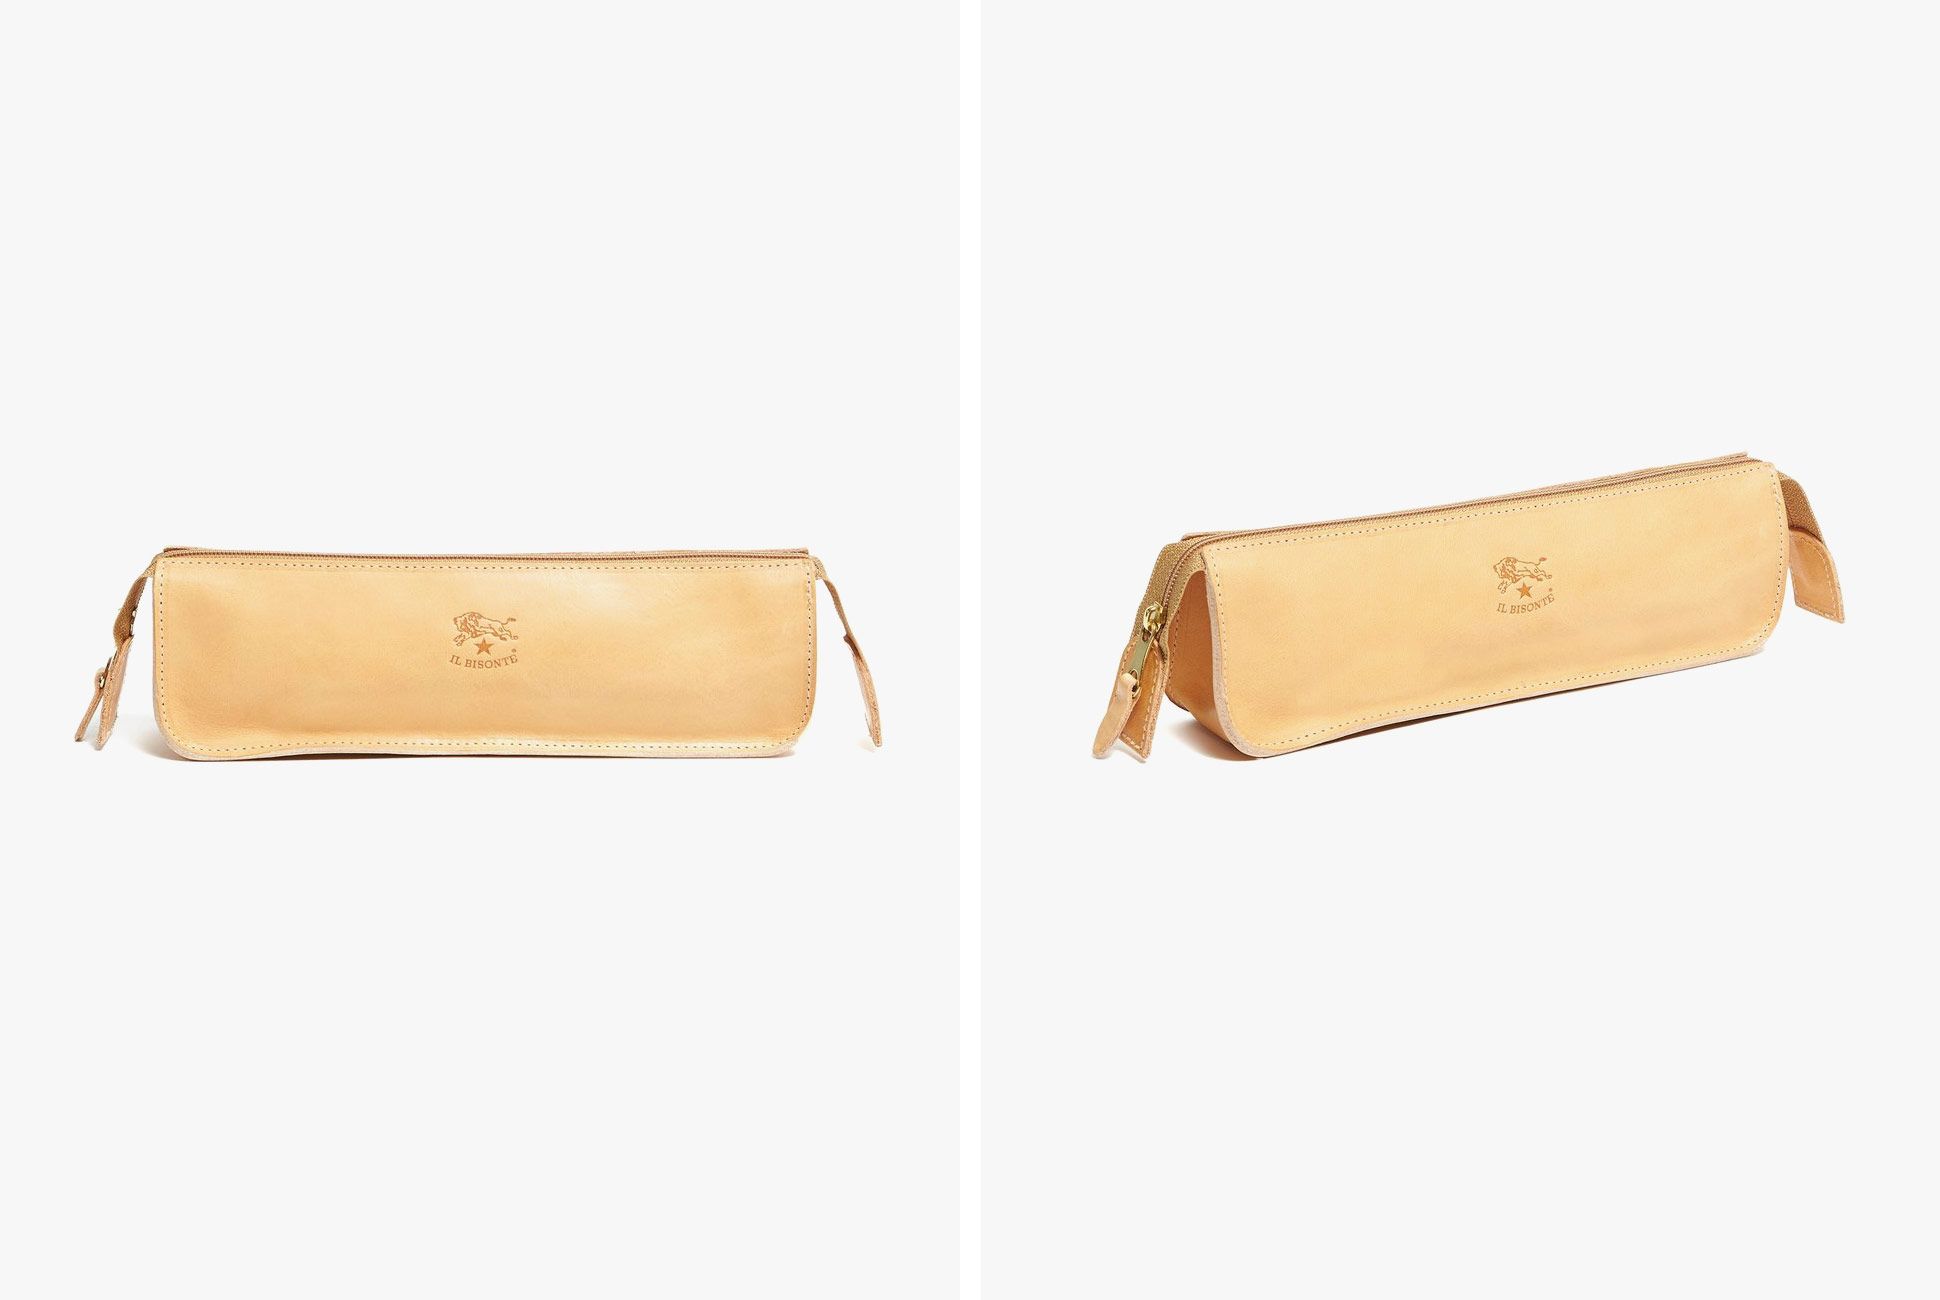 Save 23% On This Tasteful Leather Pencil Case